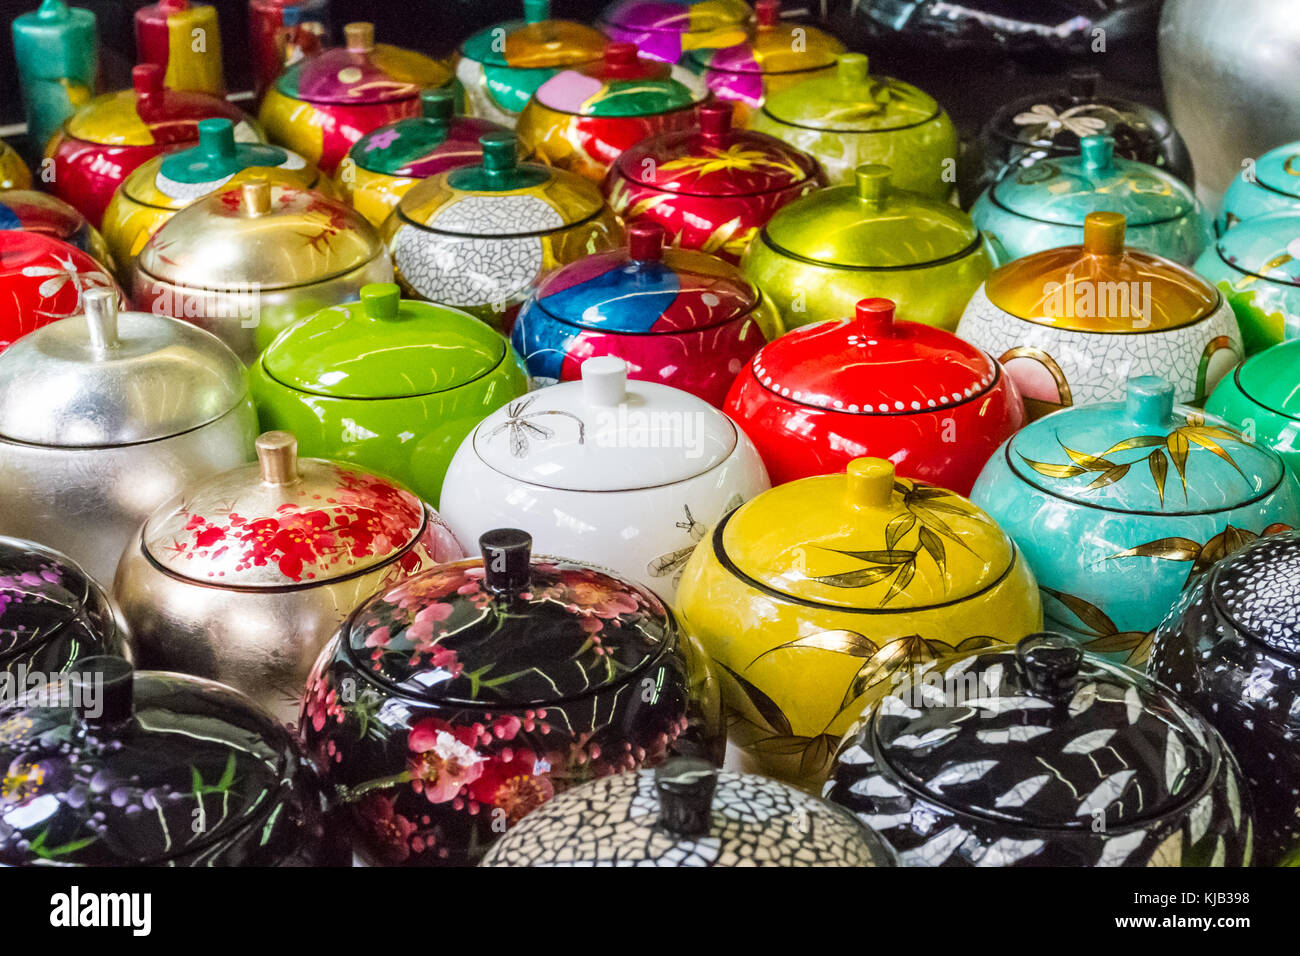 Bowls with lids on sale in Chinatown Singapore. Stock Photo